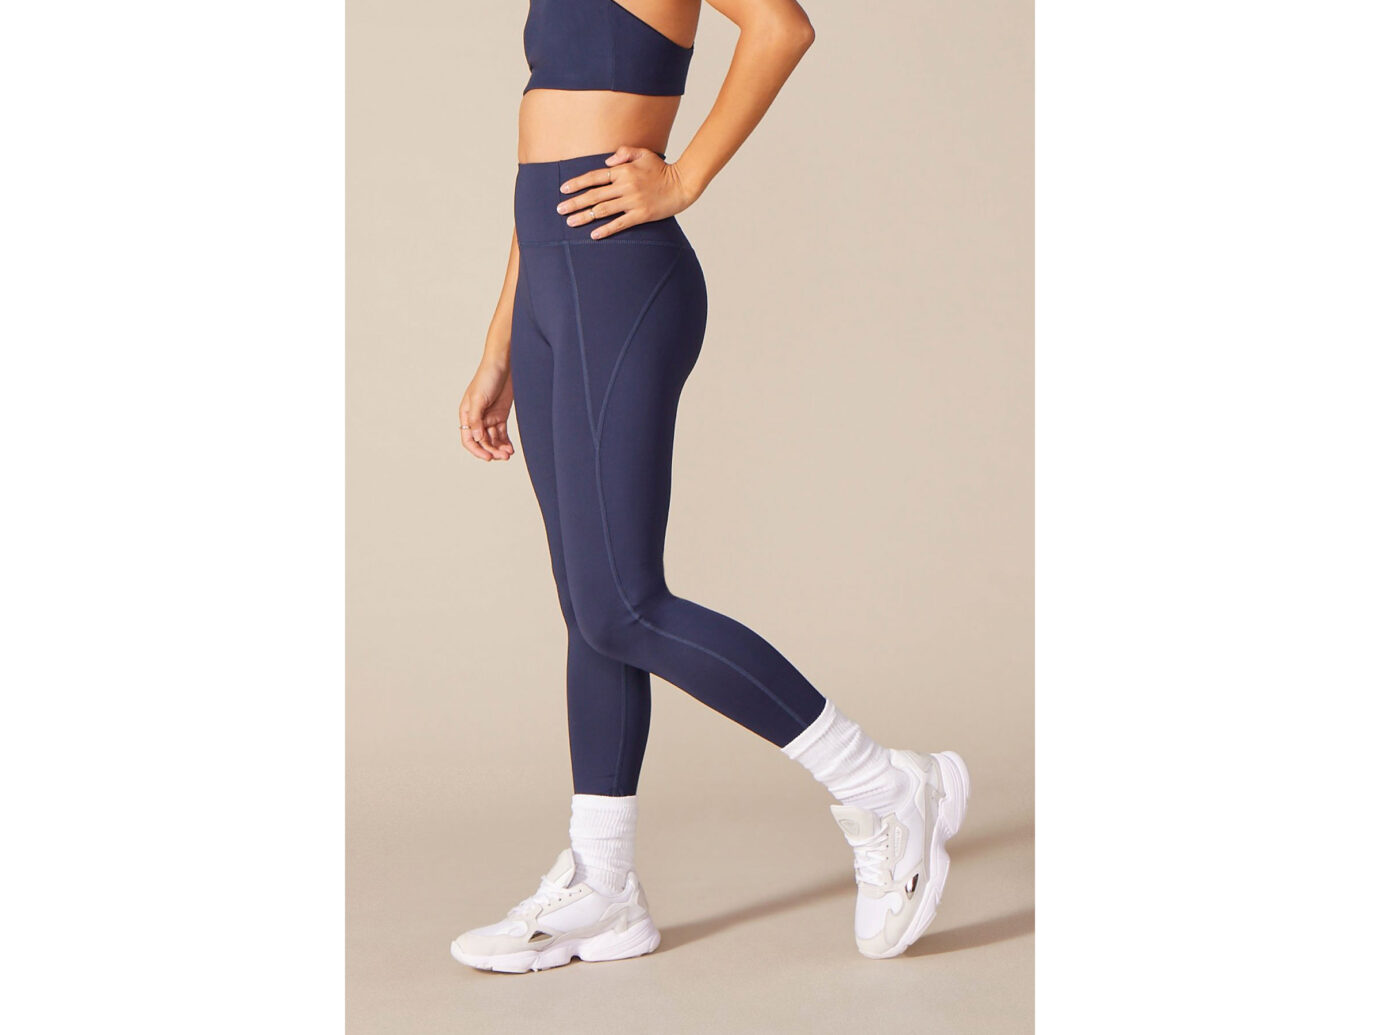 AWAWE Space and Planets Leggings Cute Workout Clothes 